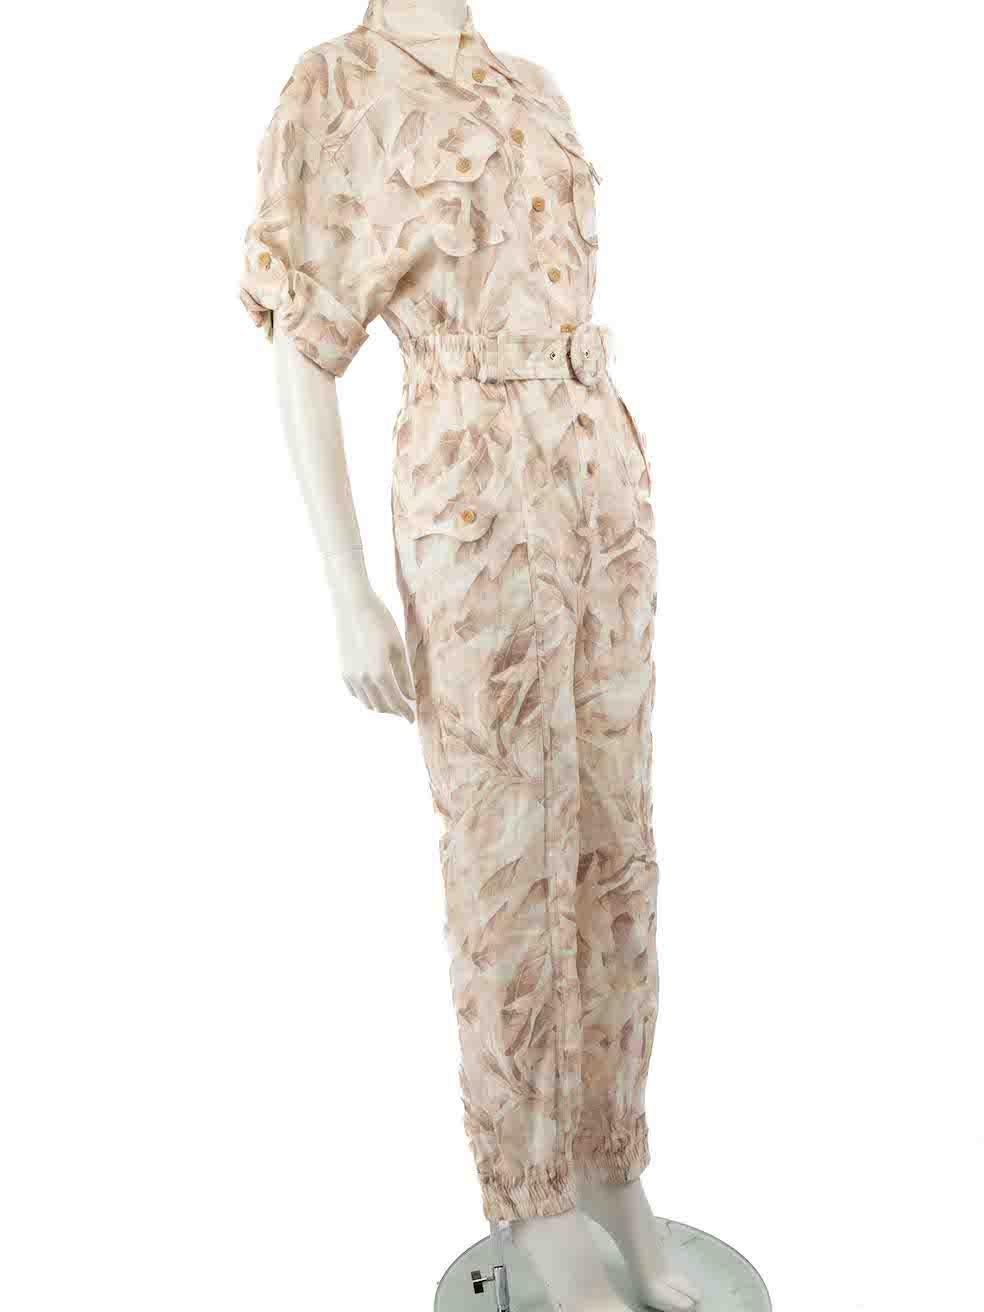 CONDITION is Very good. Hardly any visible wear to jumpsuit is evident on this used Zimmermann designer resale item.
 
 
 
 Details
 
 
 Beige
 
 Linen
 
 Jumpsuit
 
 Leaf print
 
 Short sleeves
 
 Button up fastening
 
 Belt detail
 
 Elasticated